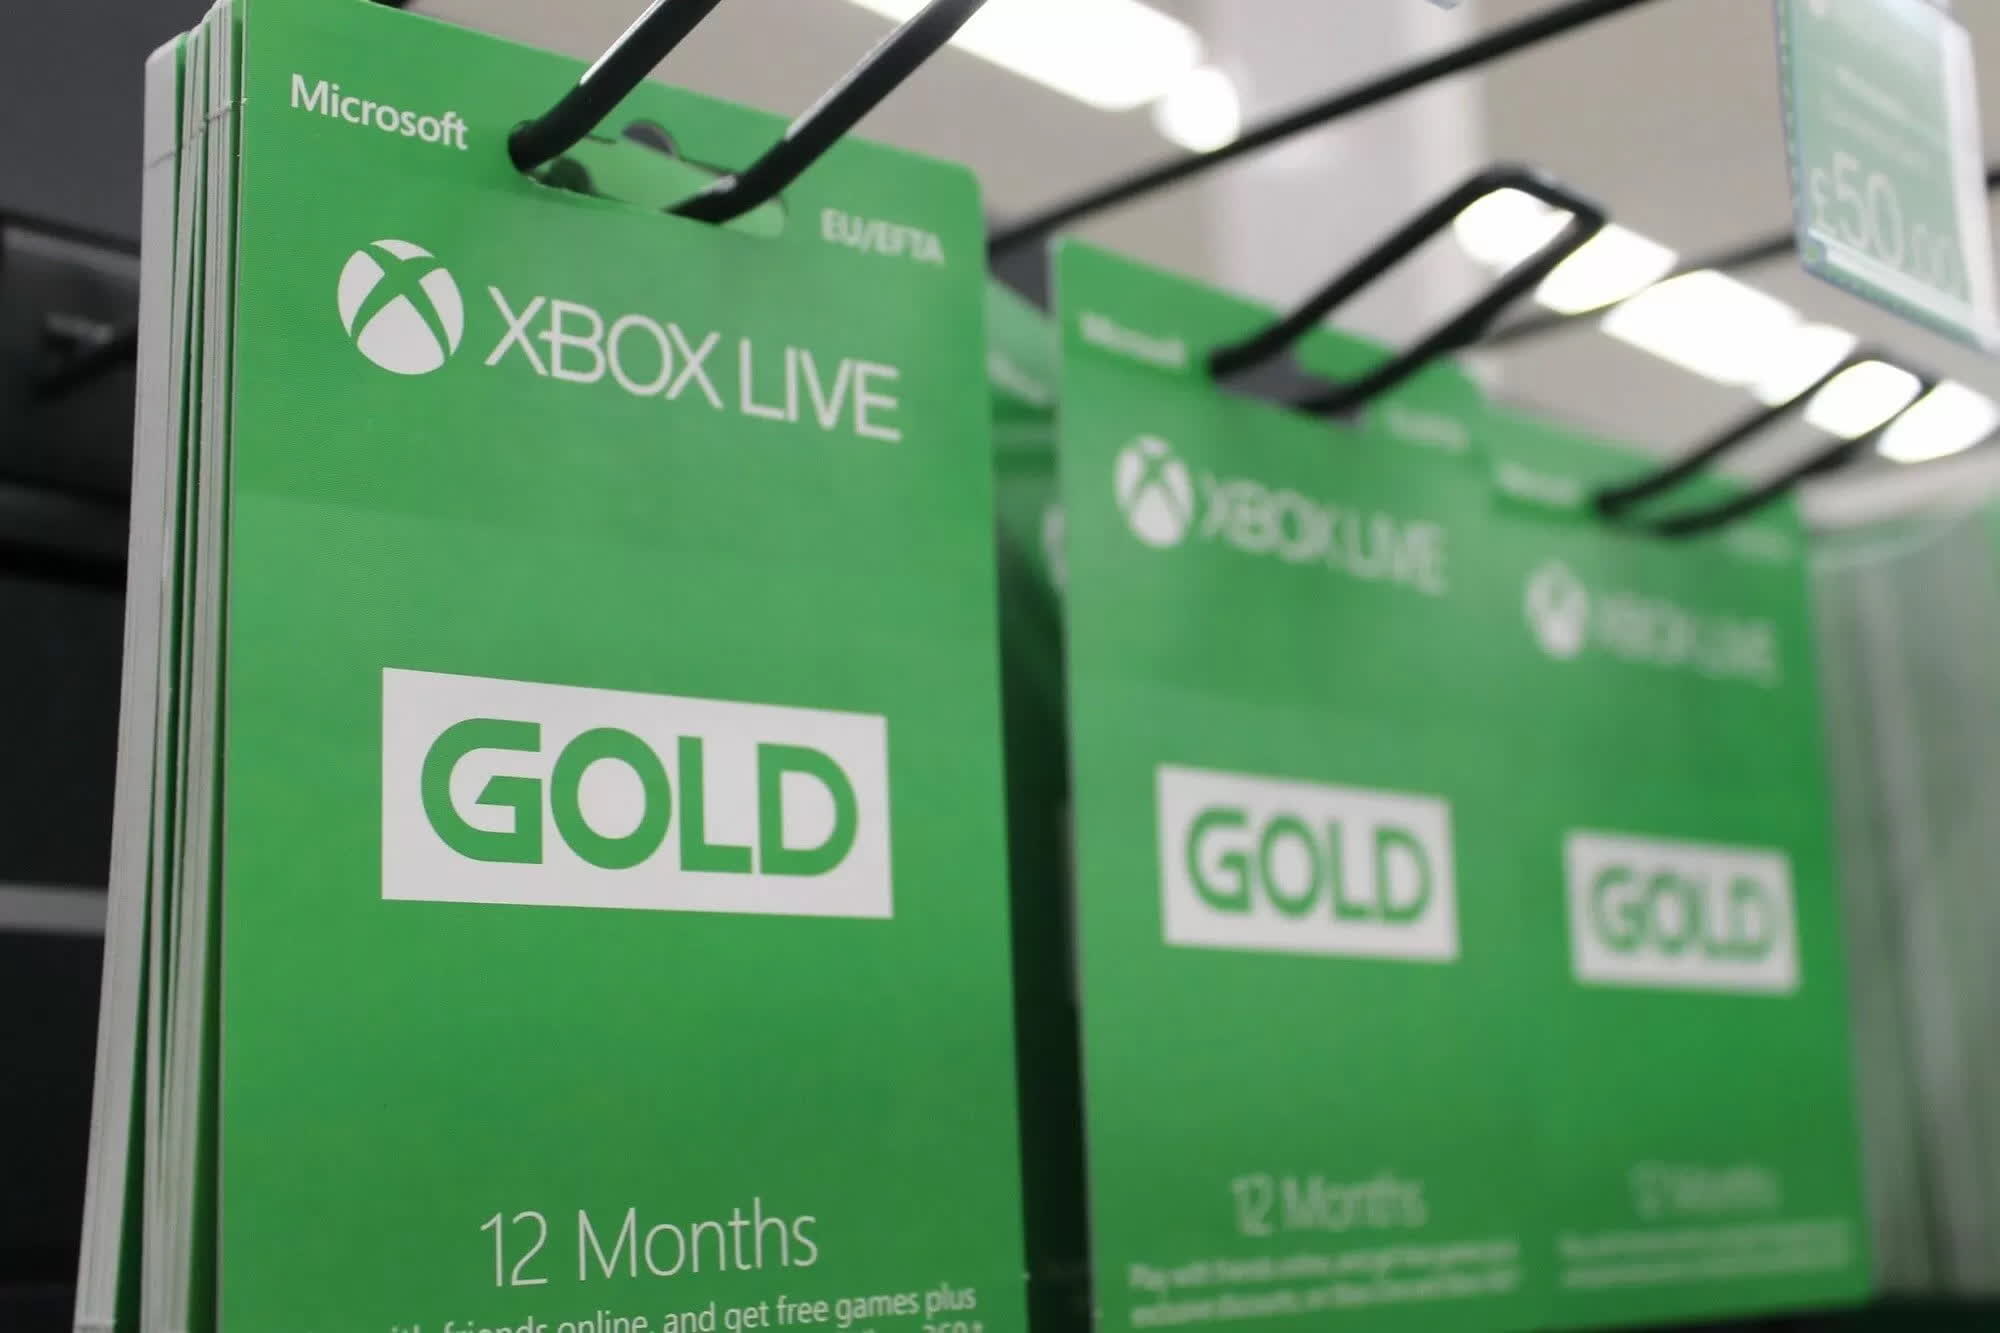 Xbox Live Gold subscriptions received price hikes, then Microsoft backtracked